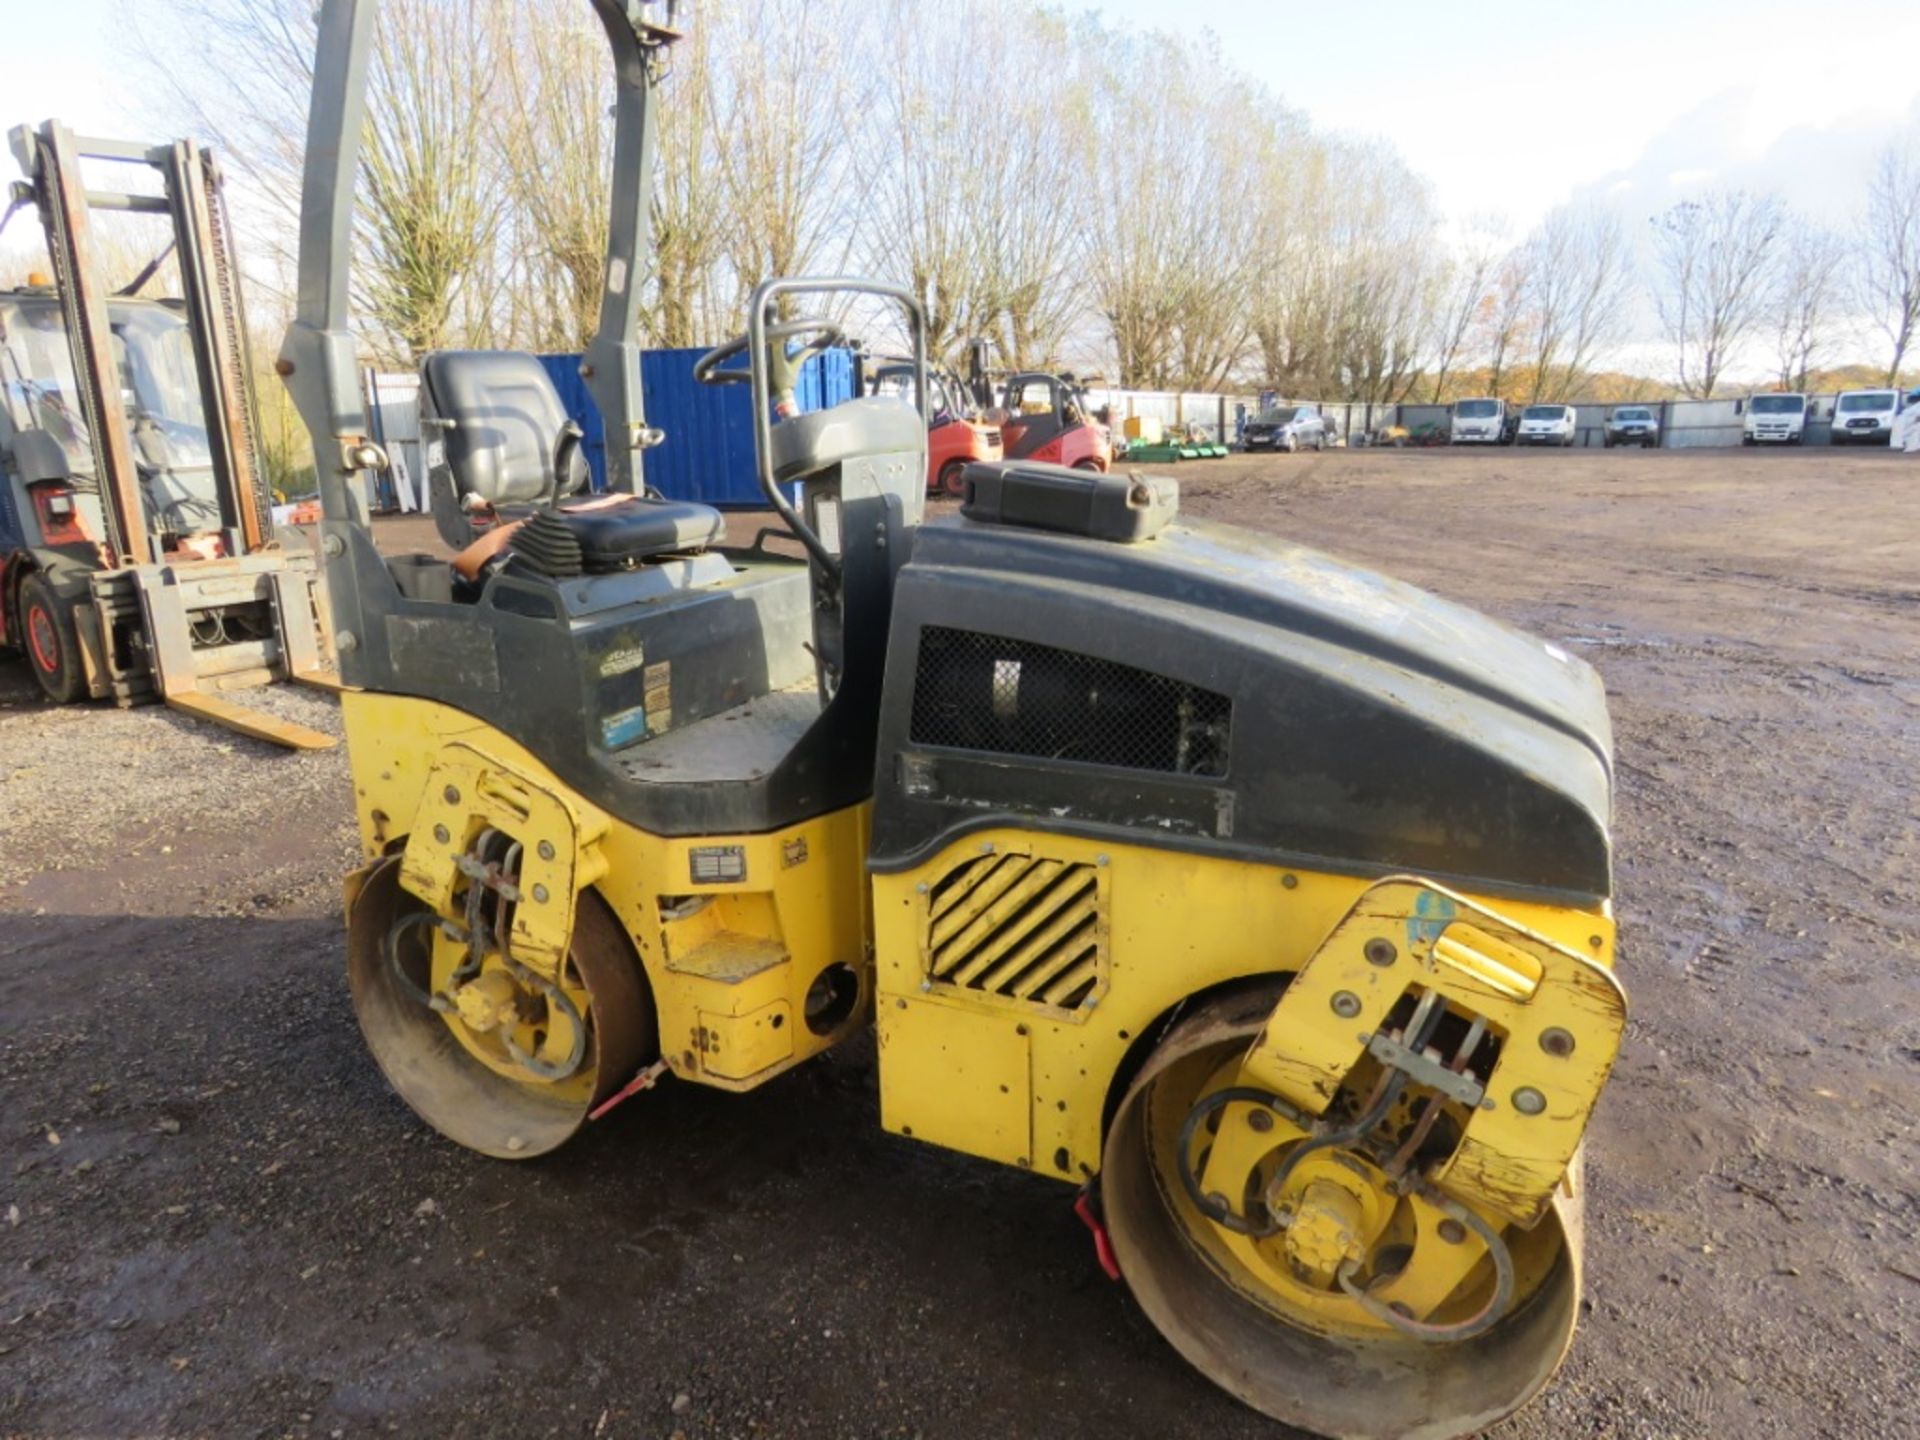 BID INCREMENT NOW £50! BOMAG 120AD-4 DOUBLE DRUM ROLLER, YEAR 2007. - Image 3 of 10